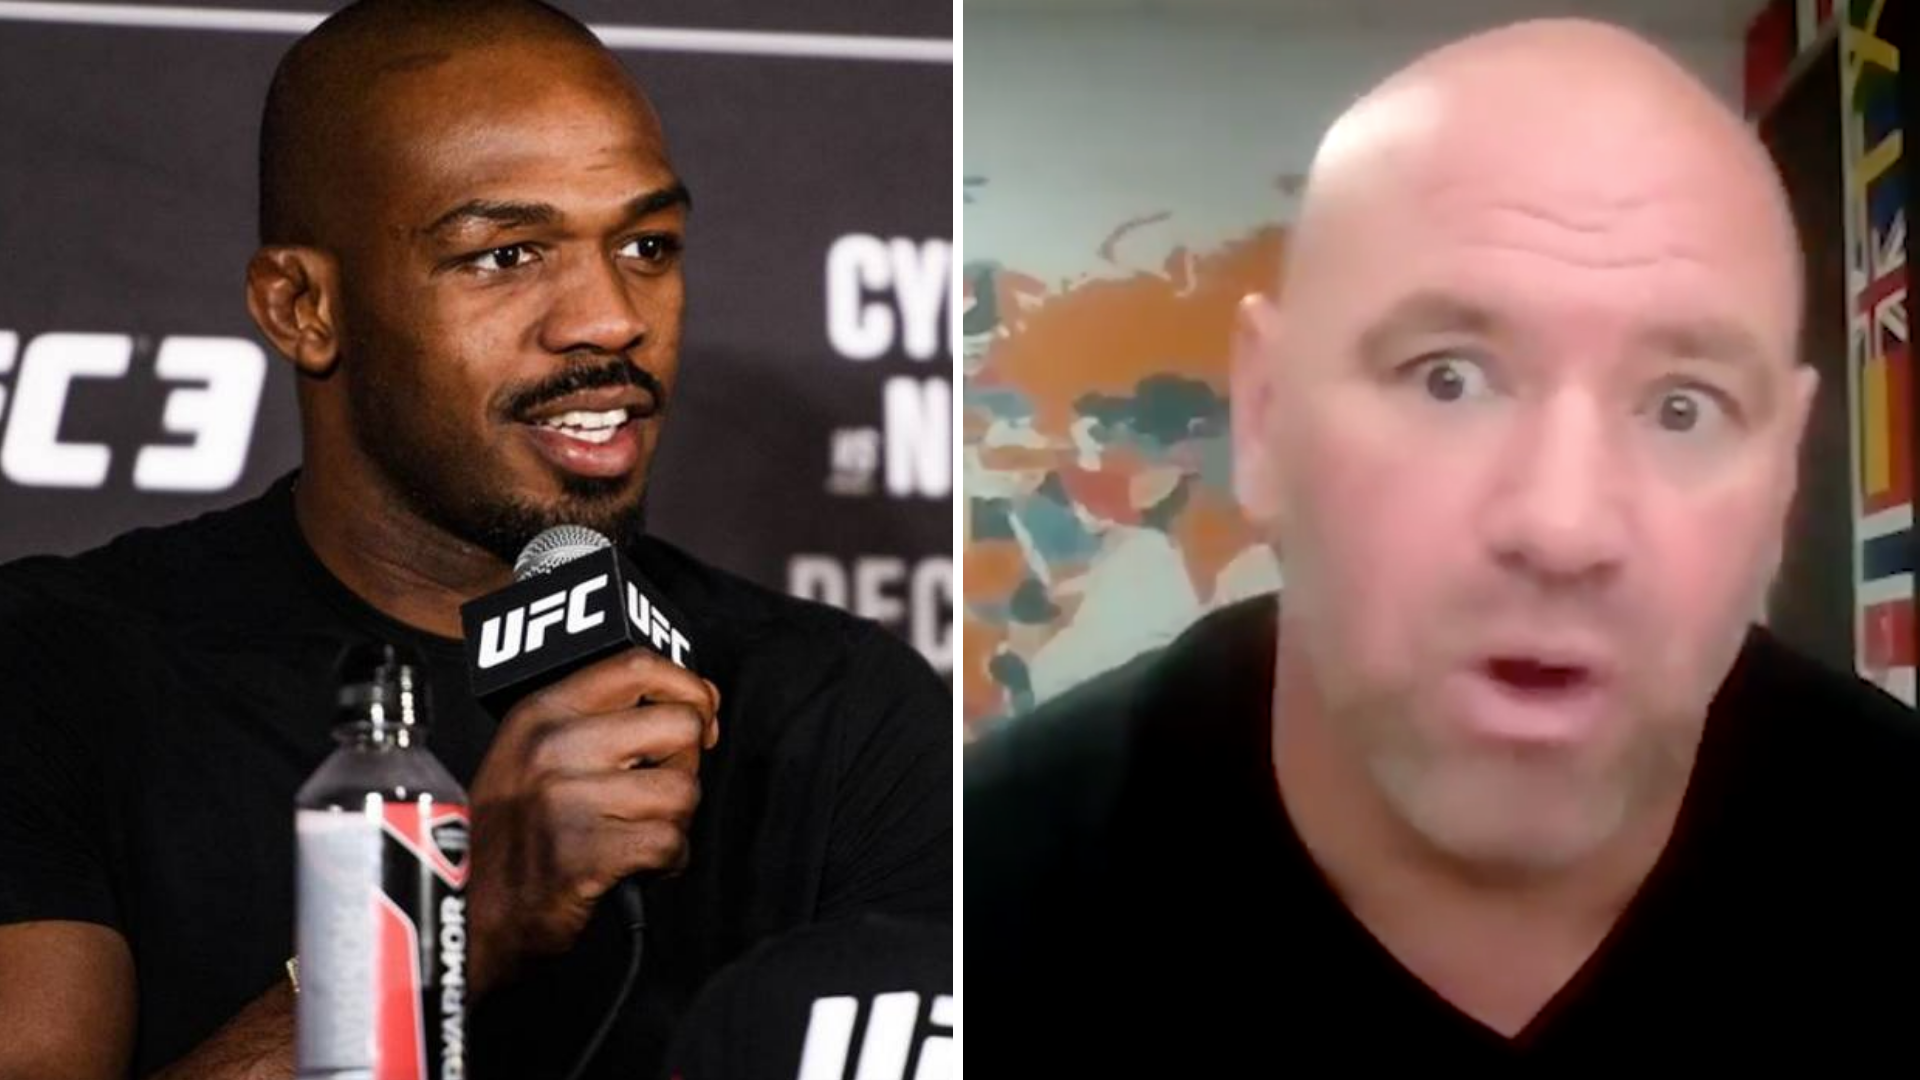 Jon Jones Launches Astonishing Rant Against Dana White After Calling Him Out For 'Absurd' Money Demands